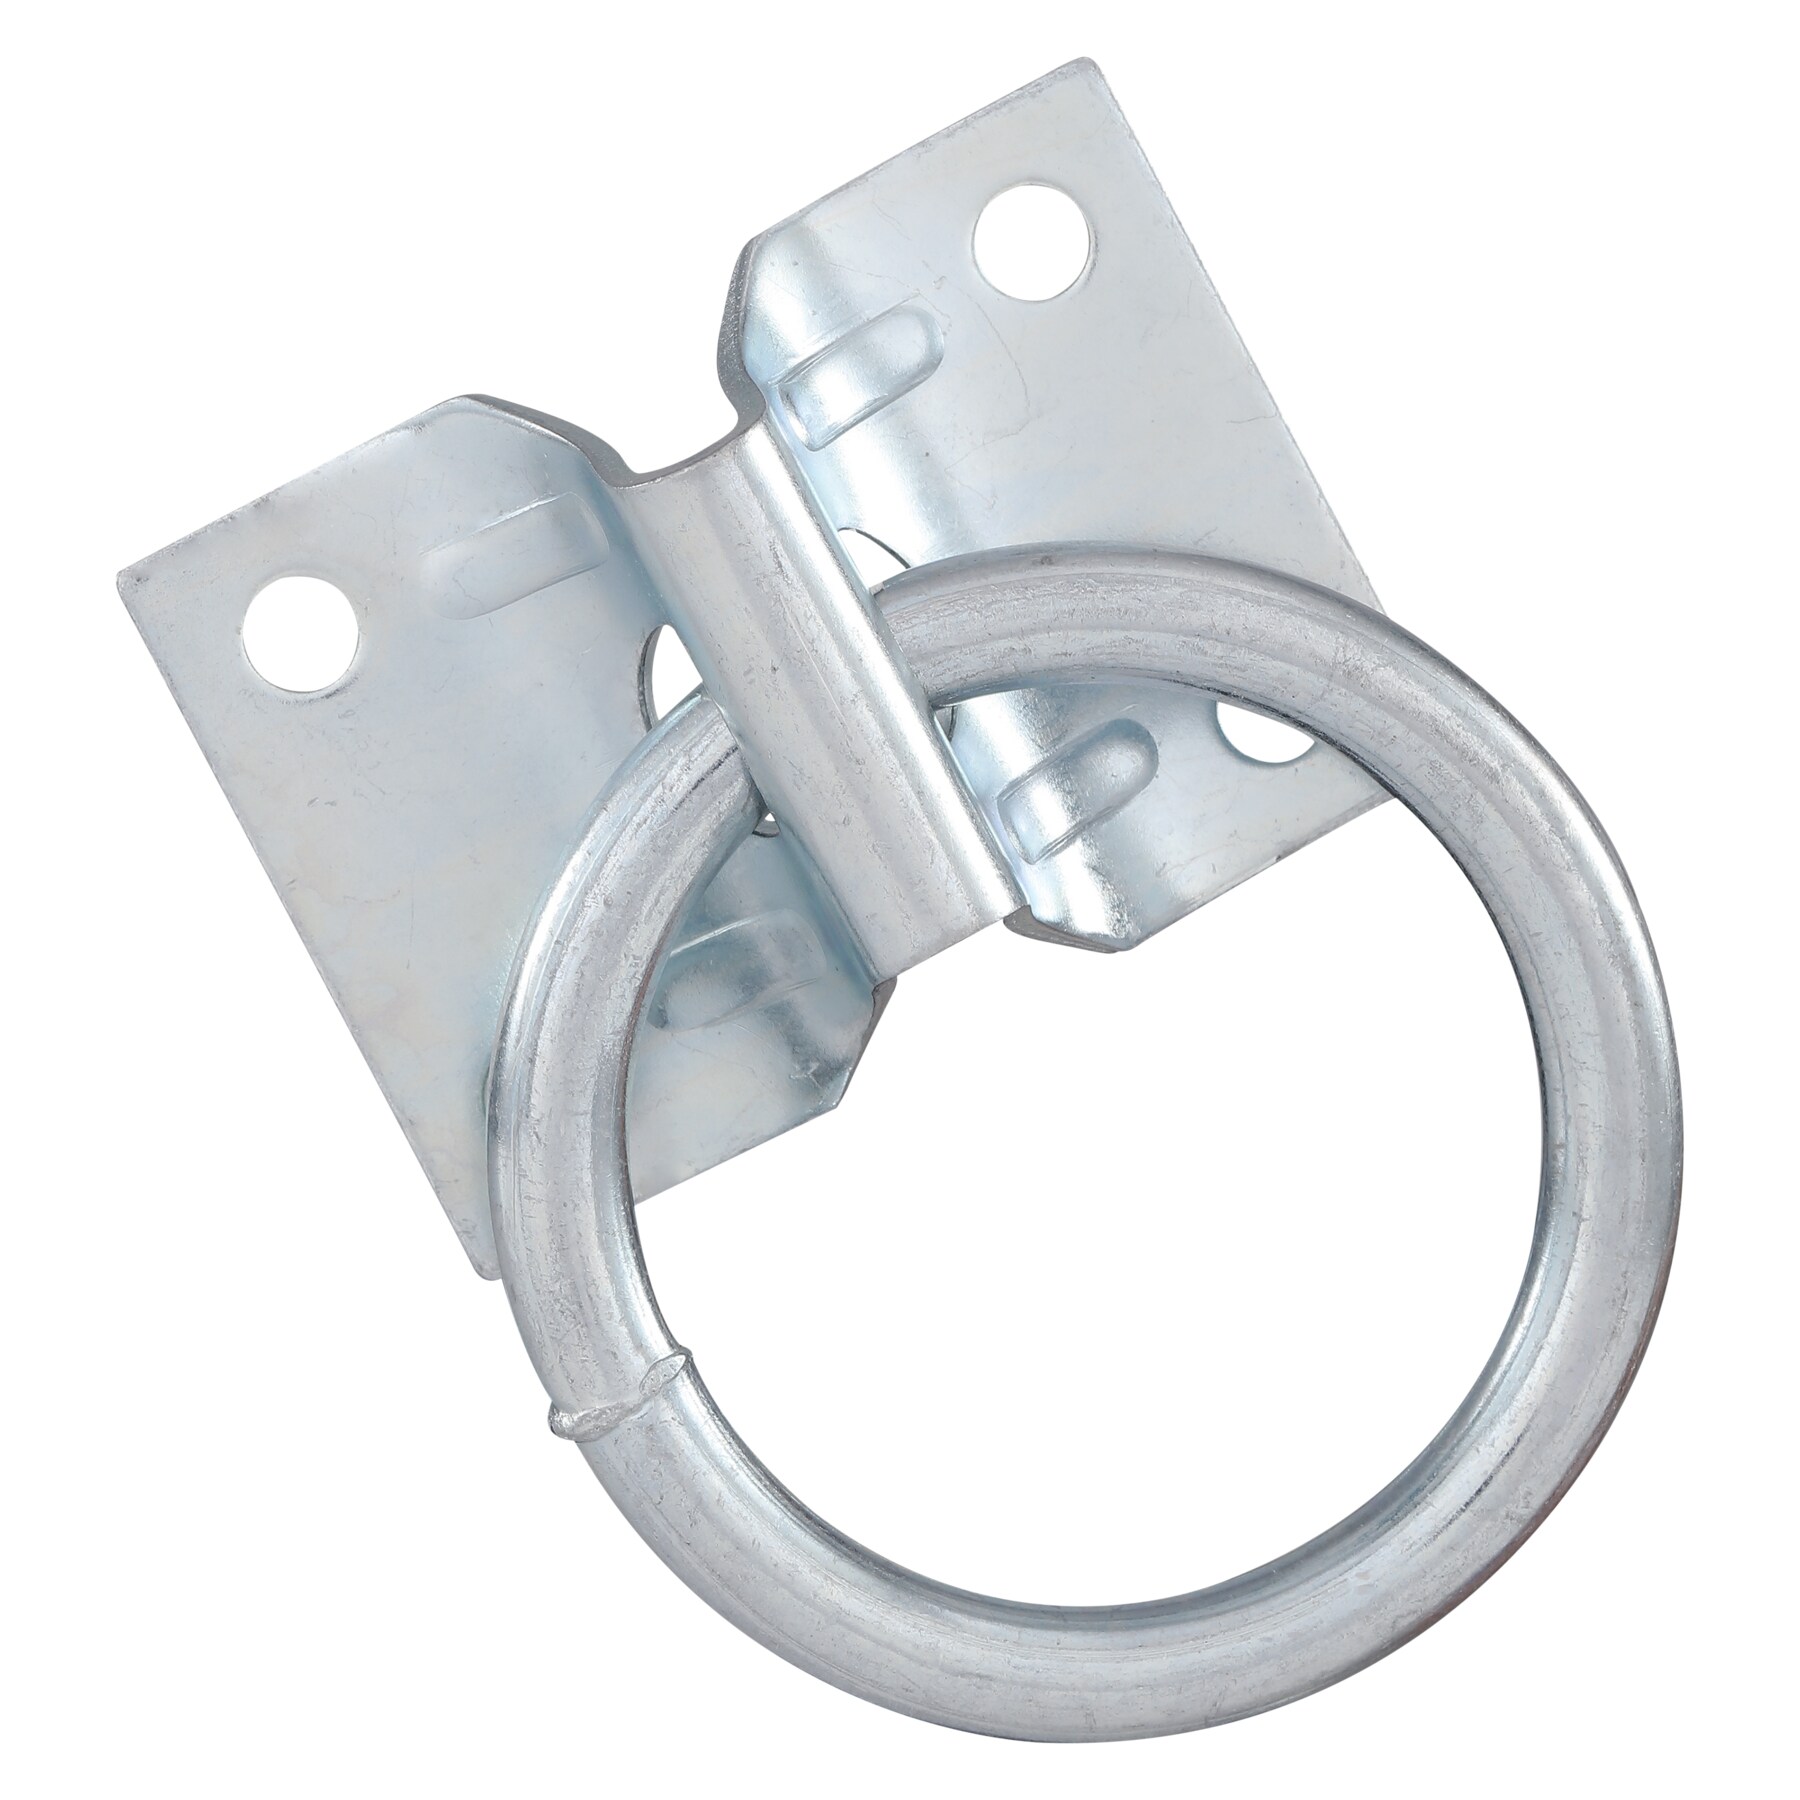 Stanley National Hardware 2060BC Zinc Plated Hitch Ring w/Plate 